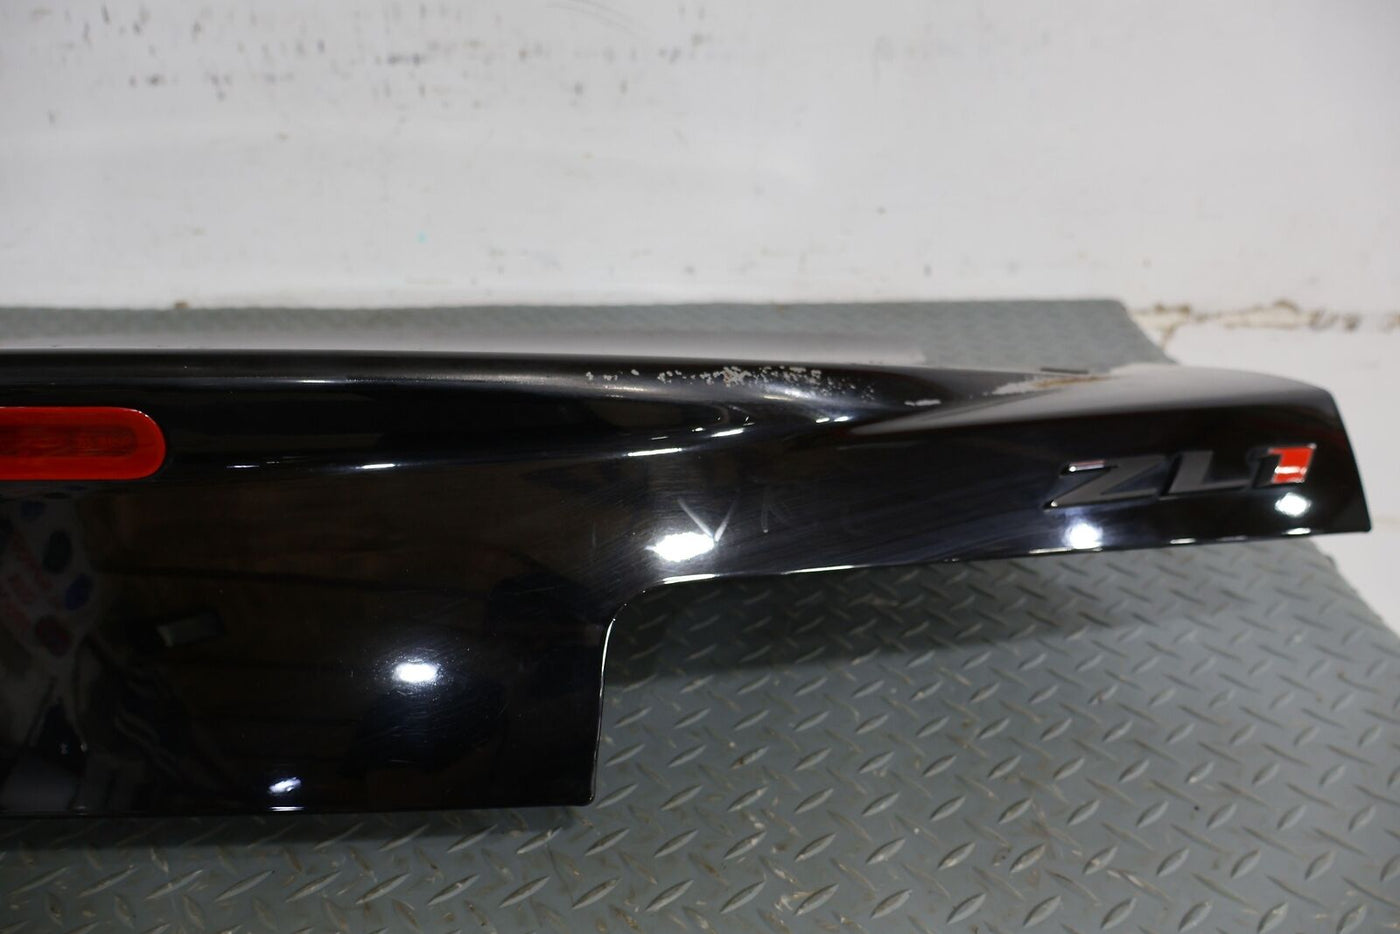 14-15 Chevy Camaro ZL1 Coupe OEM Trunk Deck Lid (Black GBA) Spoiler Not Included